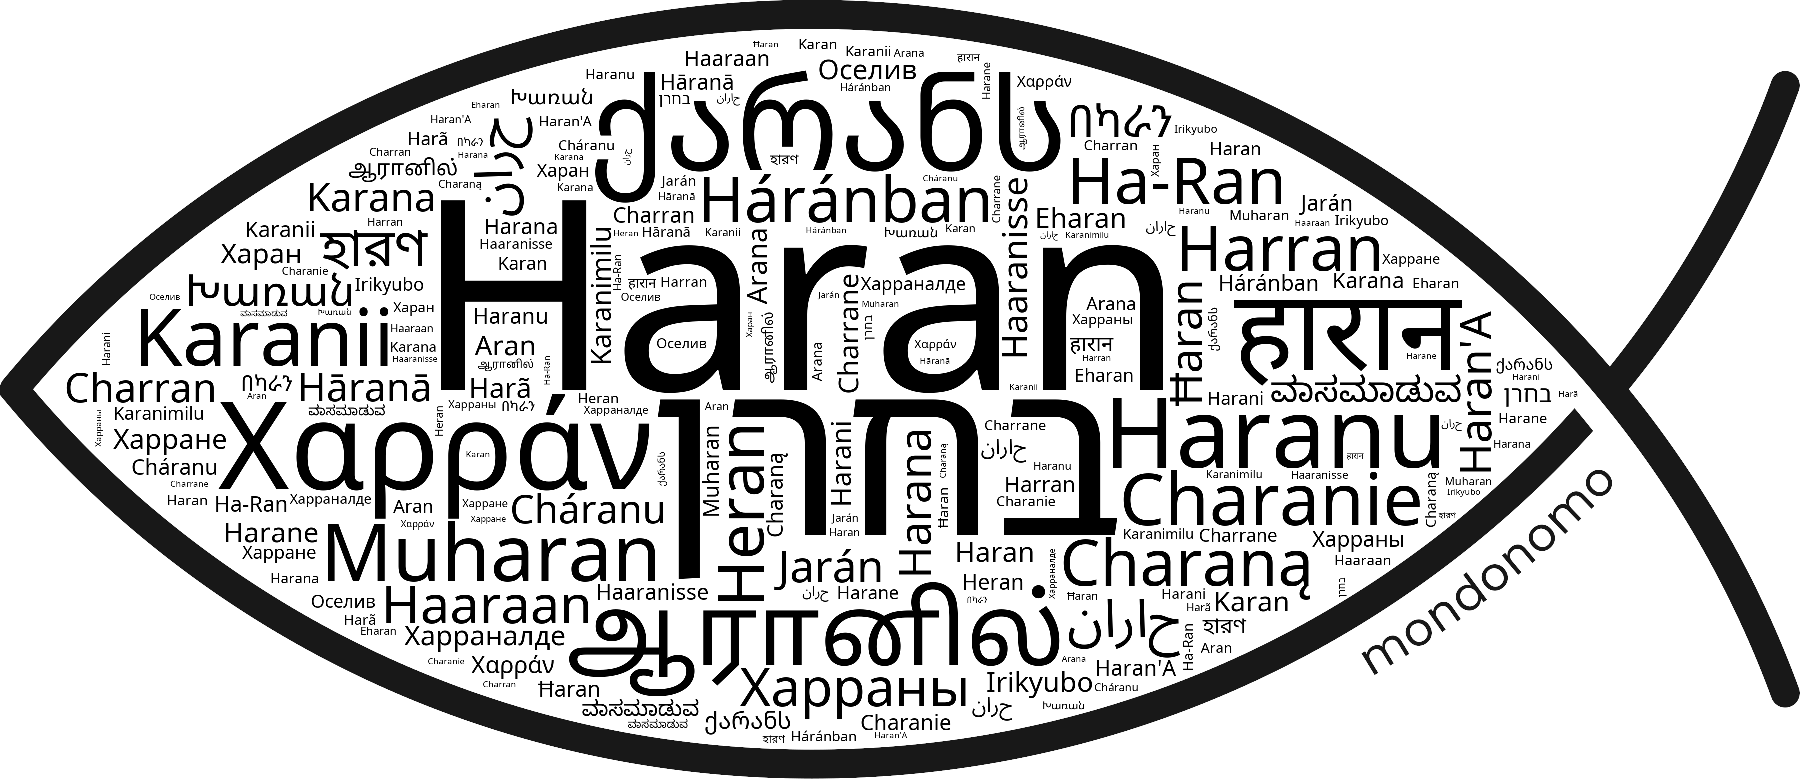 Name Haran in the world's Bibles